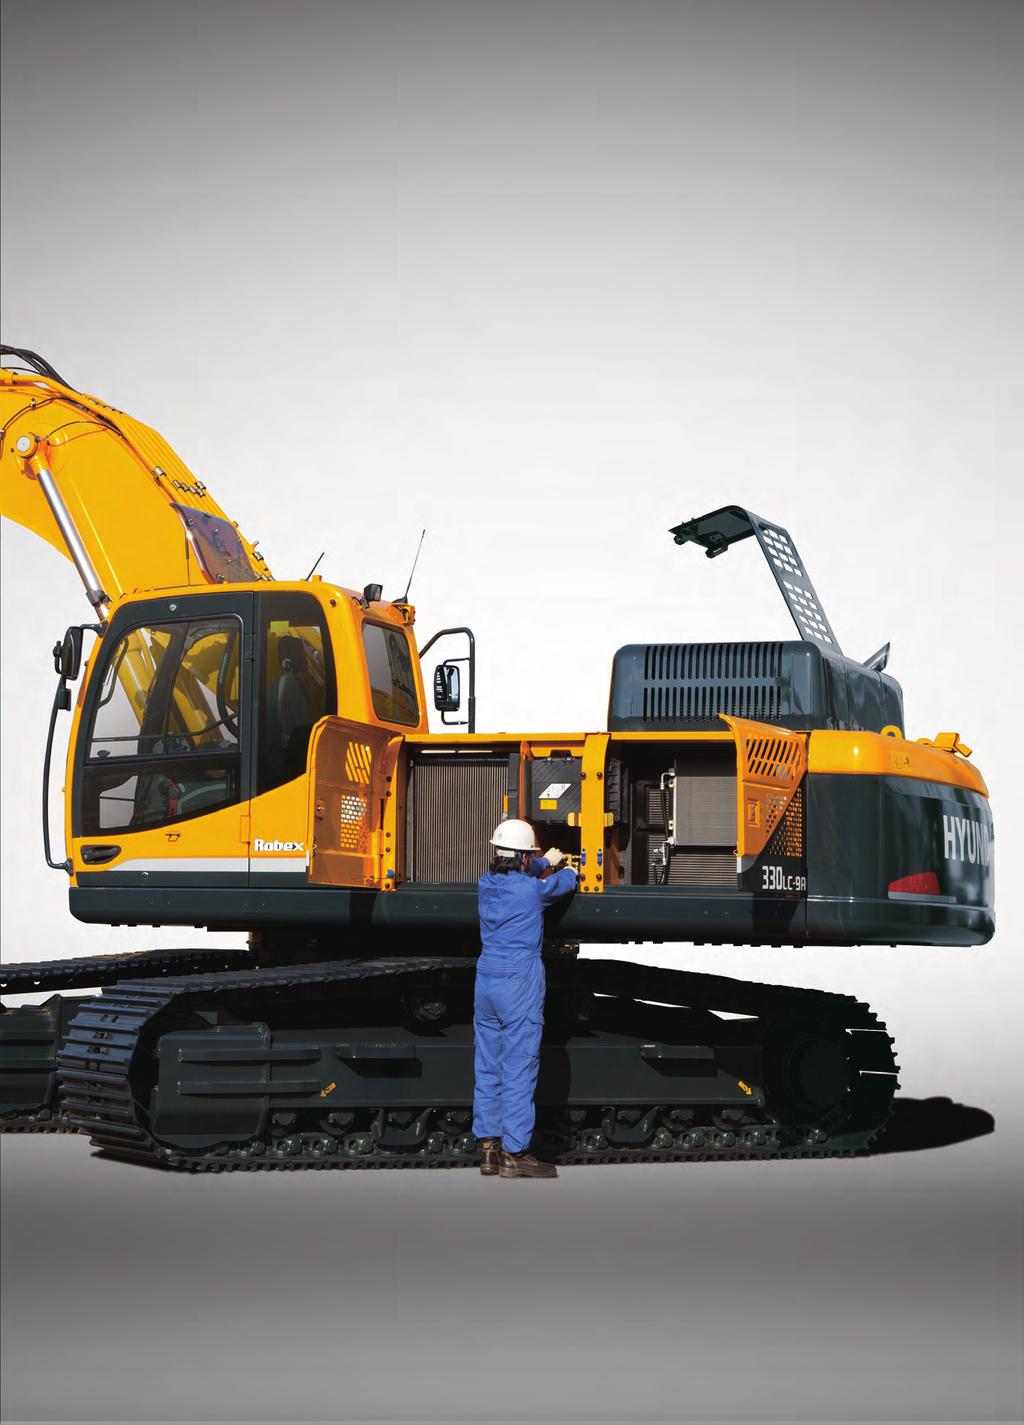 Fuel Efficiency 9A series excavators are engineered to be extremely fuel efficient.